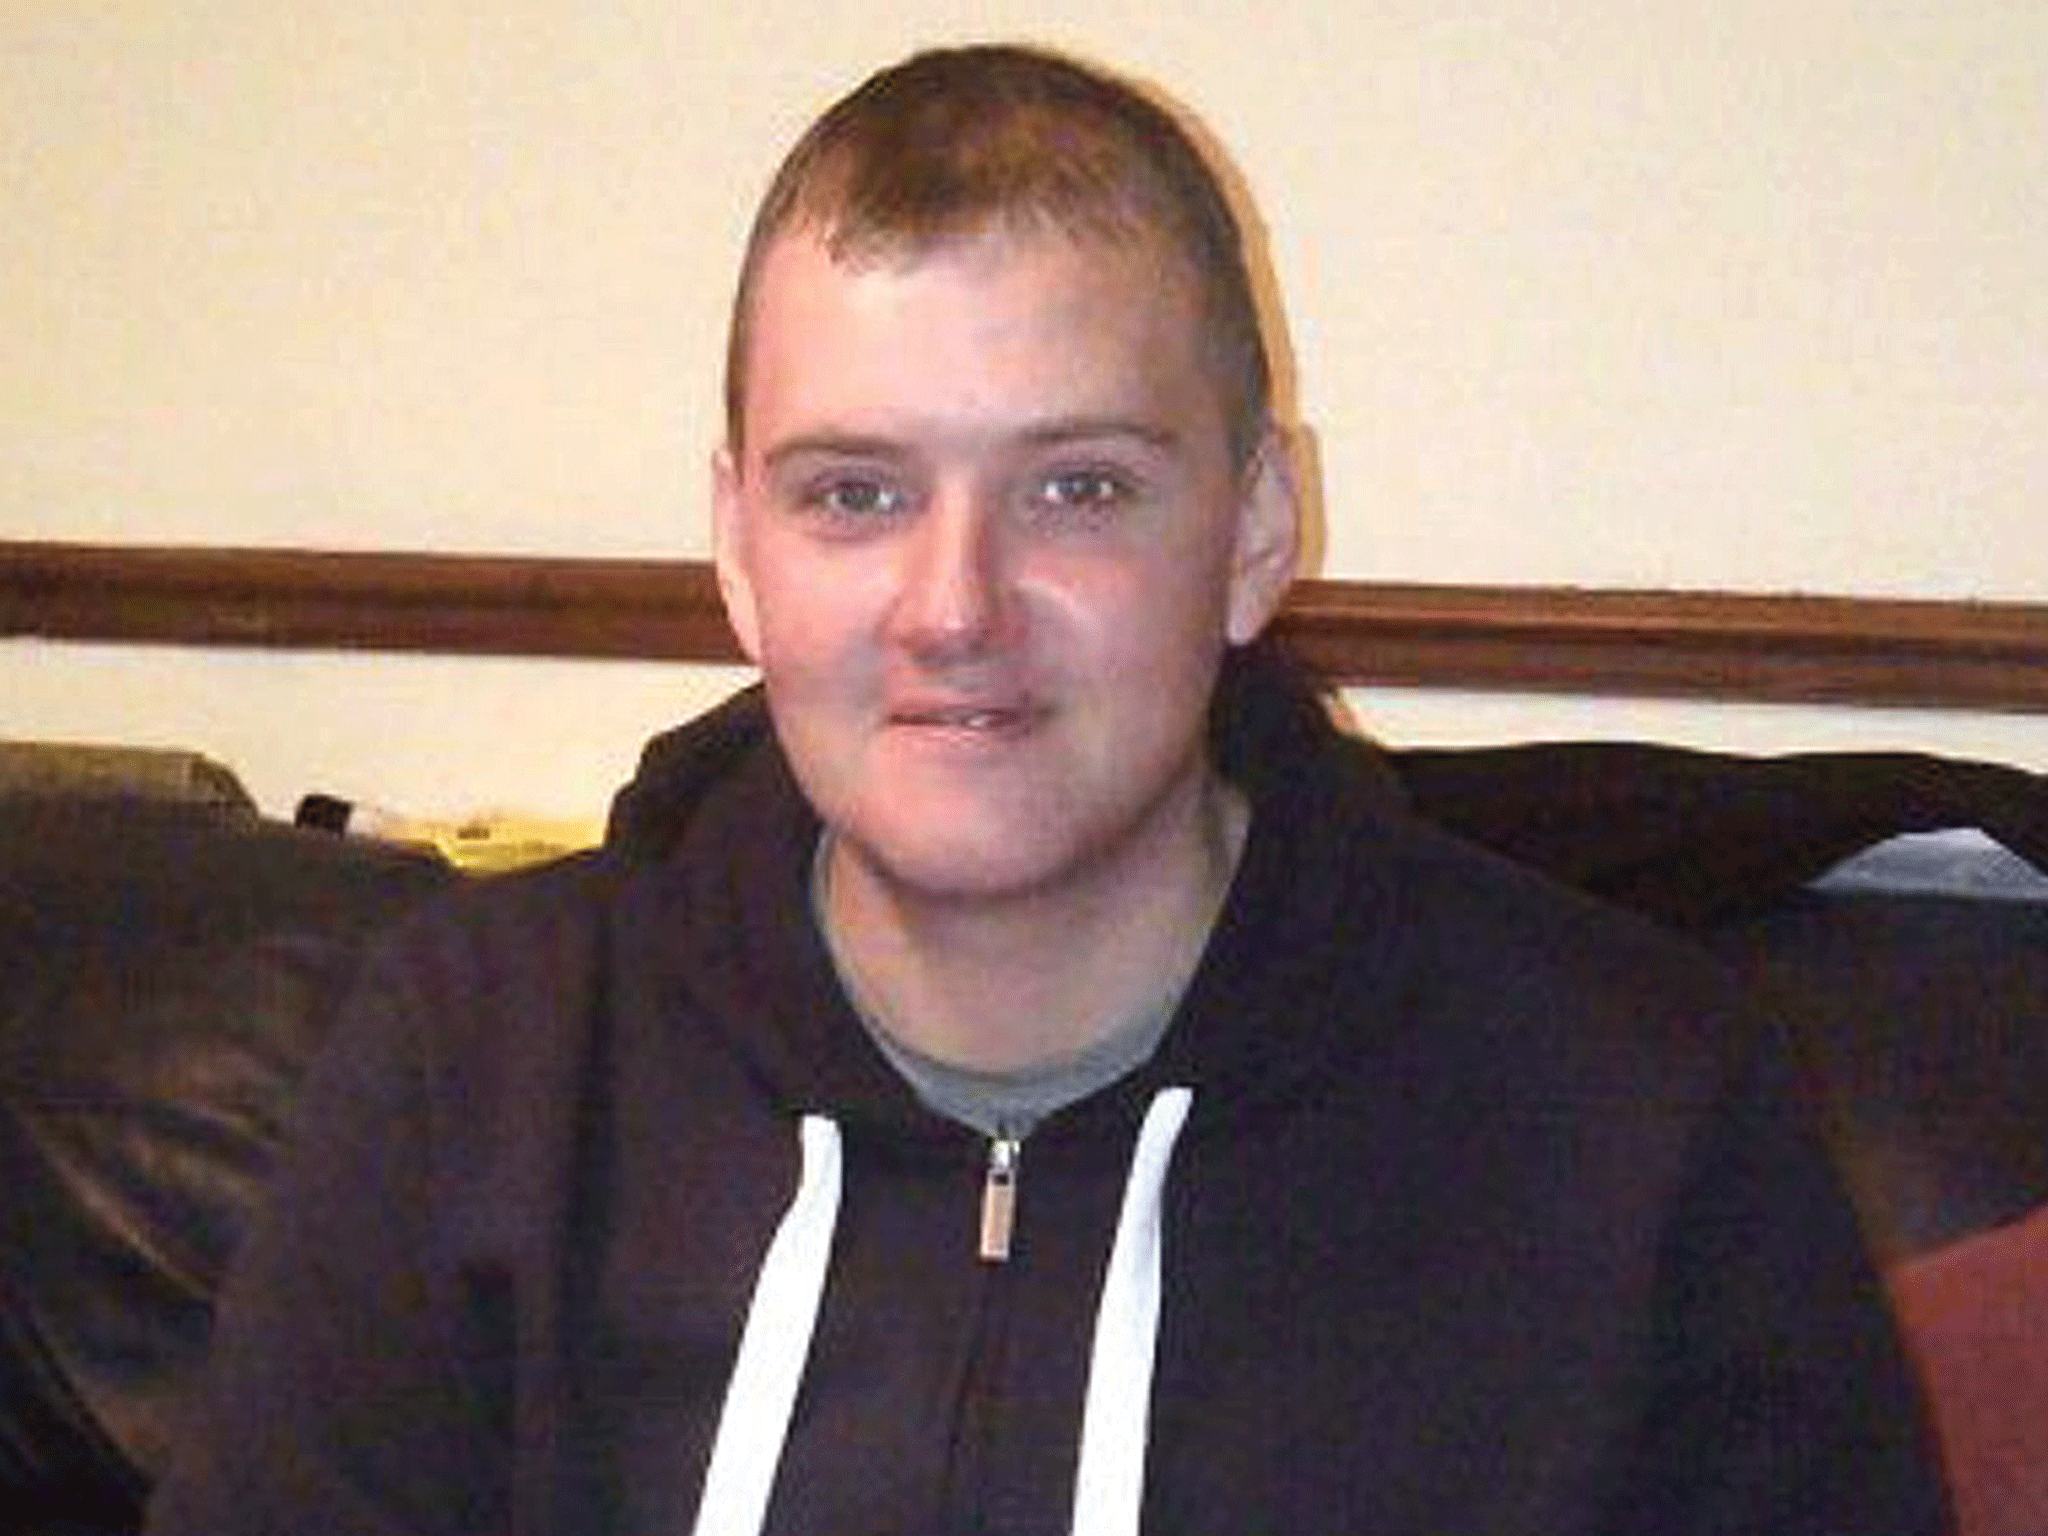 Matthew Symonds, 34, whose body was found at the Biffa waste depot in Avonmouth, Bristol, on Friday morning.